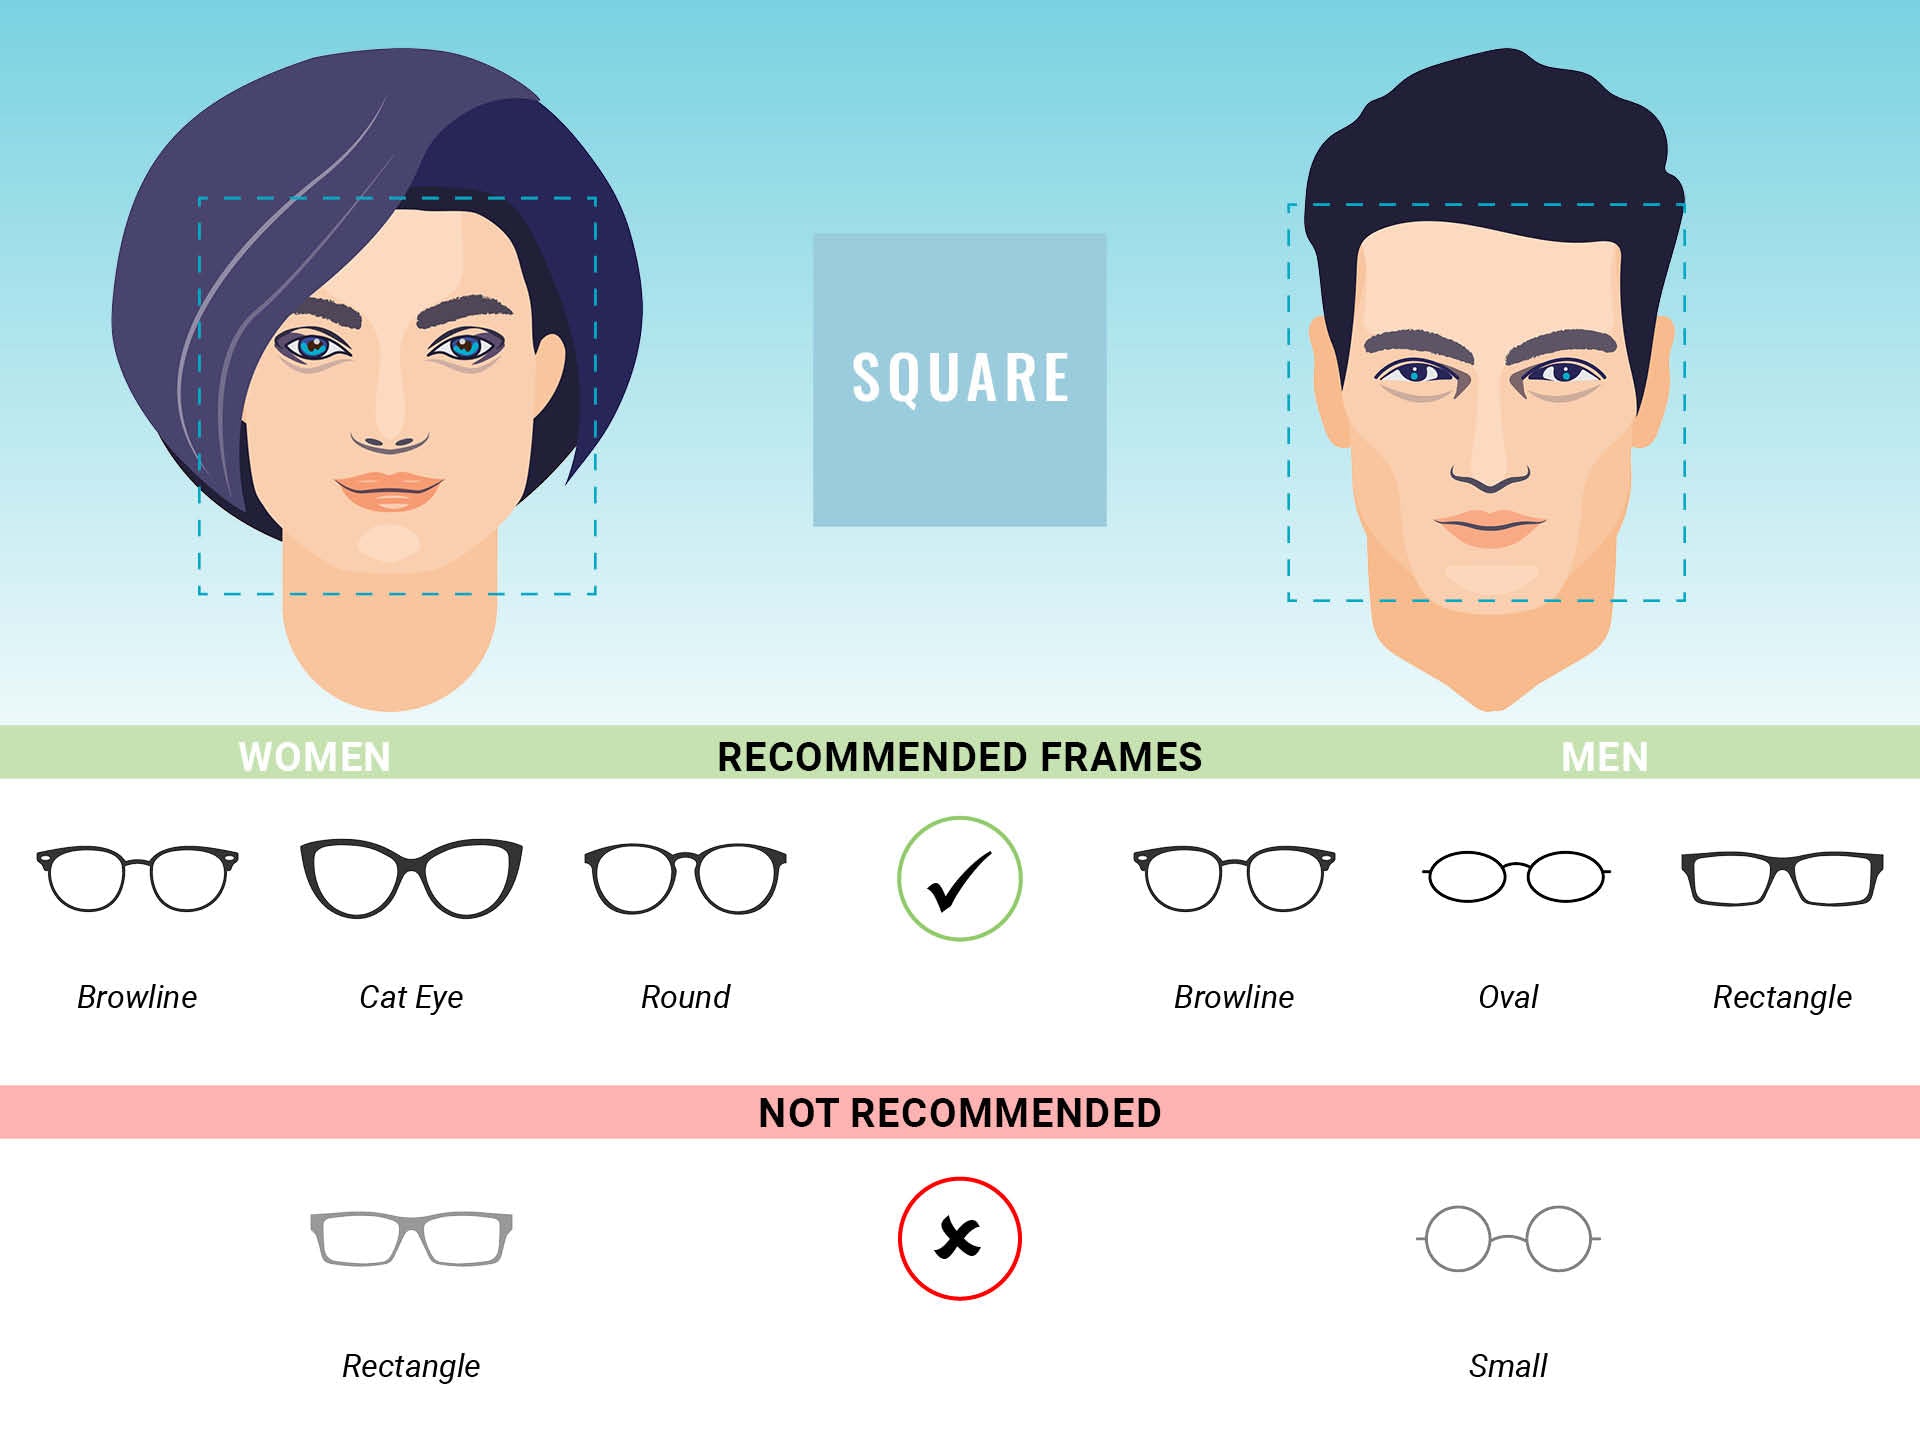 Eyeglass frame recommendations for square face shapes for men and women